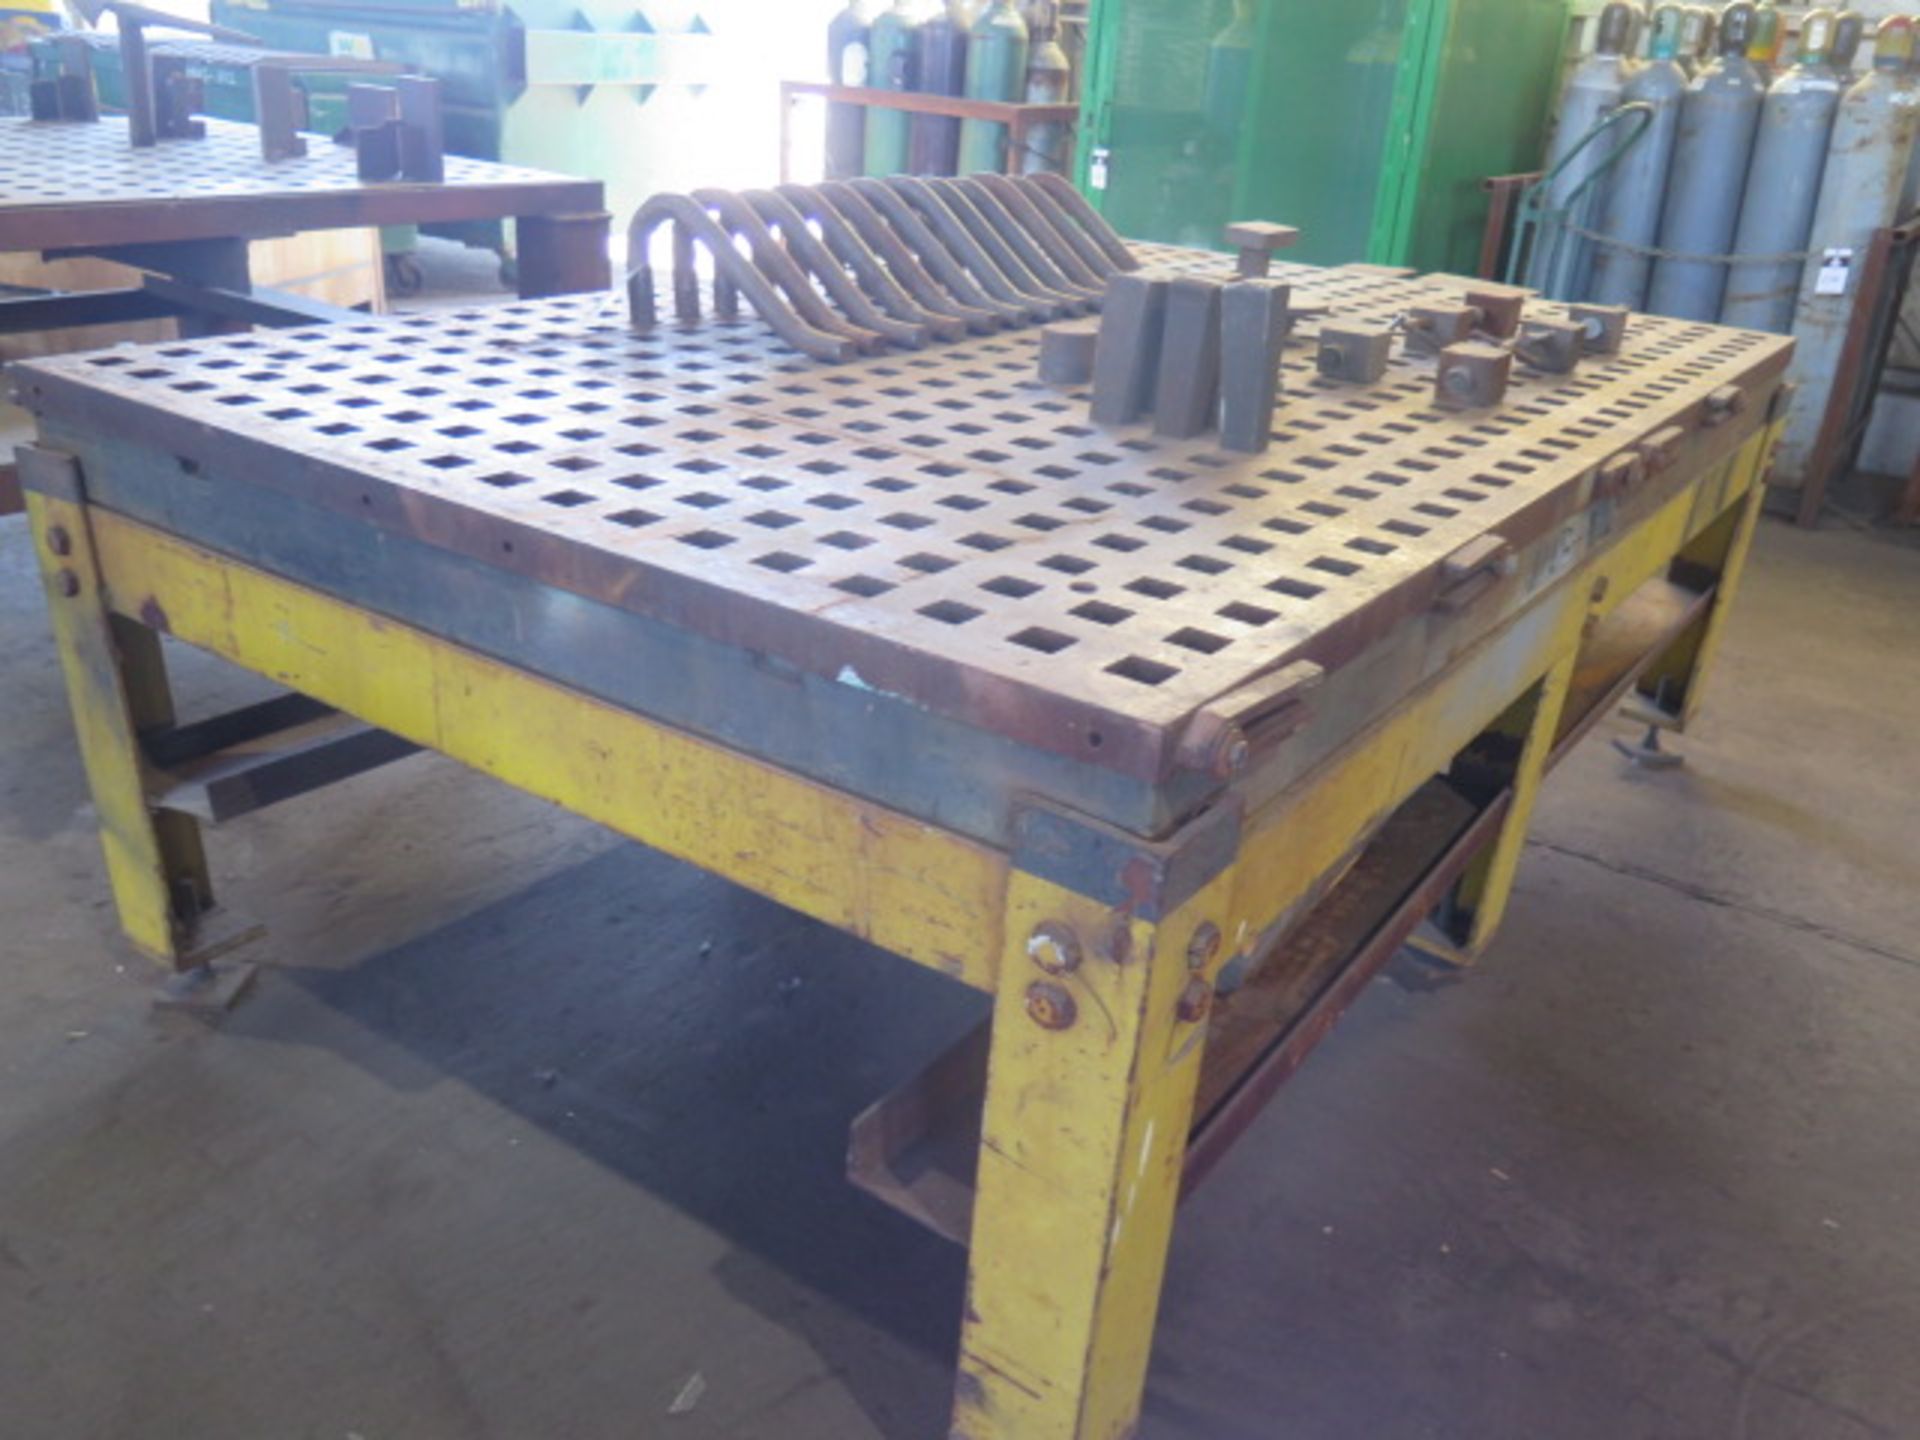 Mar-Vic 60” x 96” Acorn Style Forming Table w/ Tooling (SOLD AS-IS - NO WARRANTY) - Image 3 of 11